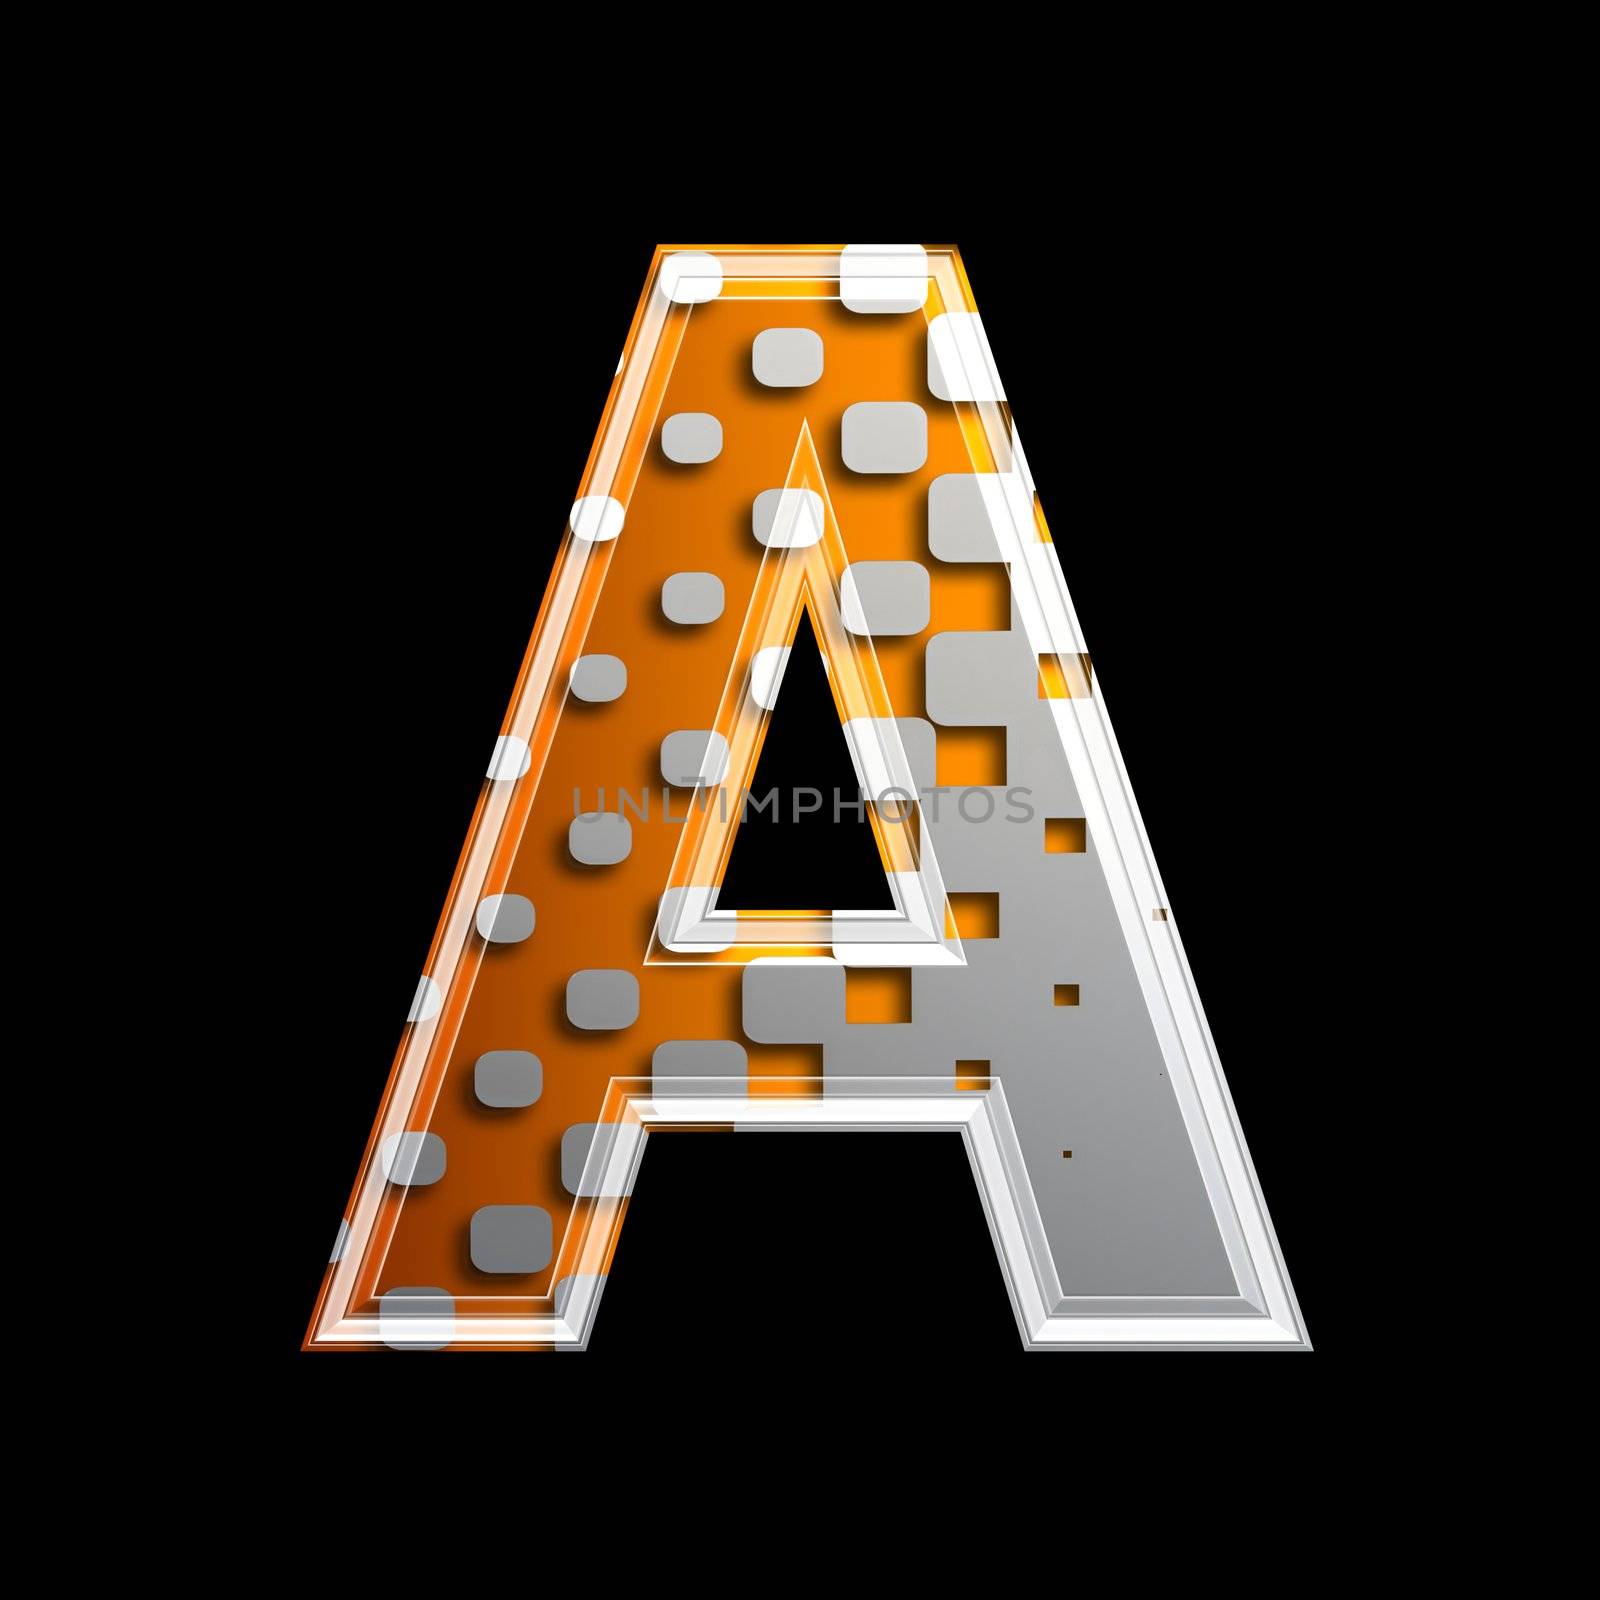 halftone 3d letter - A by chrisroll